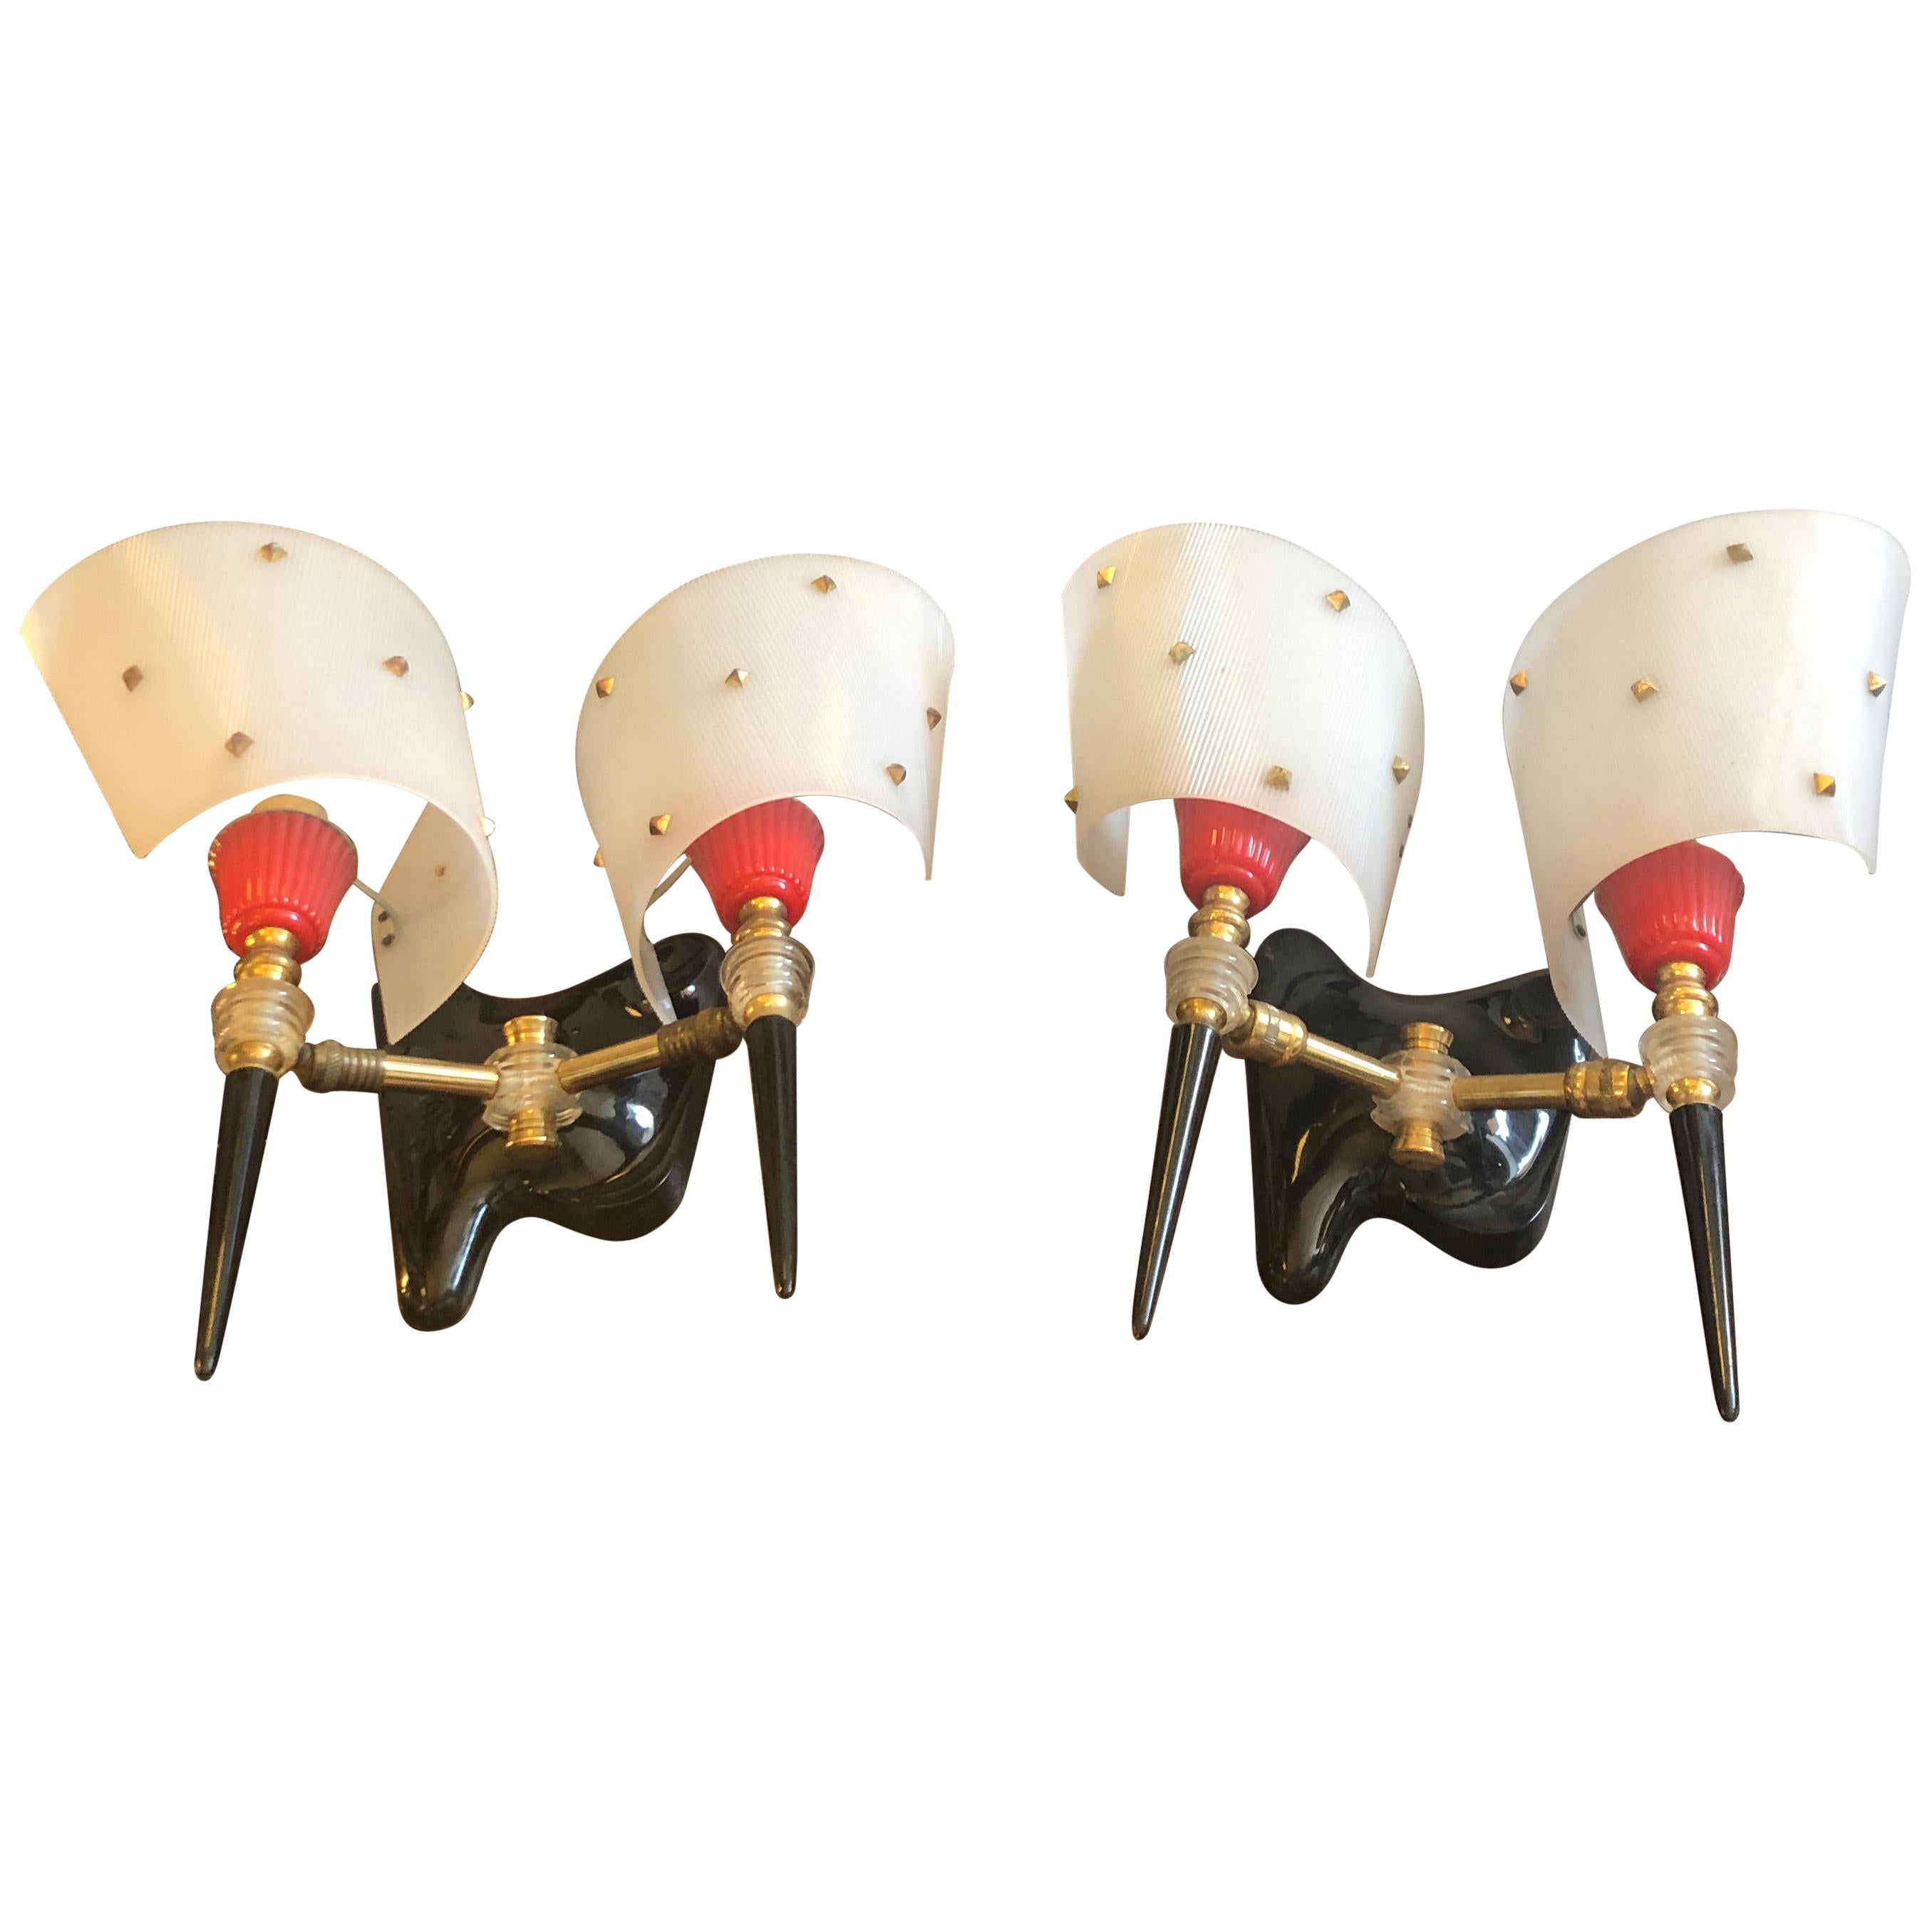 Mid-Century Modern French Wall Sconces, circa 1960